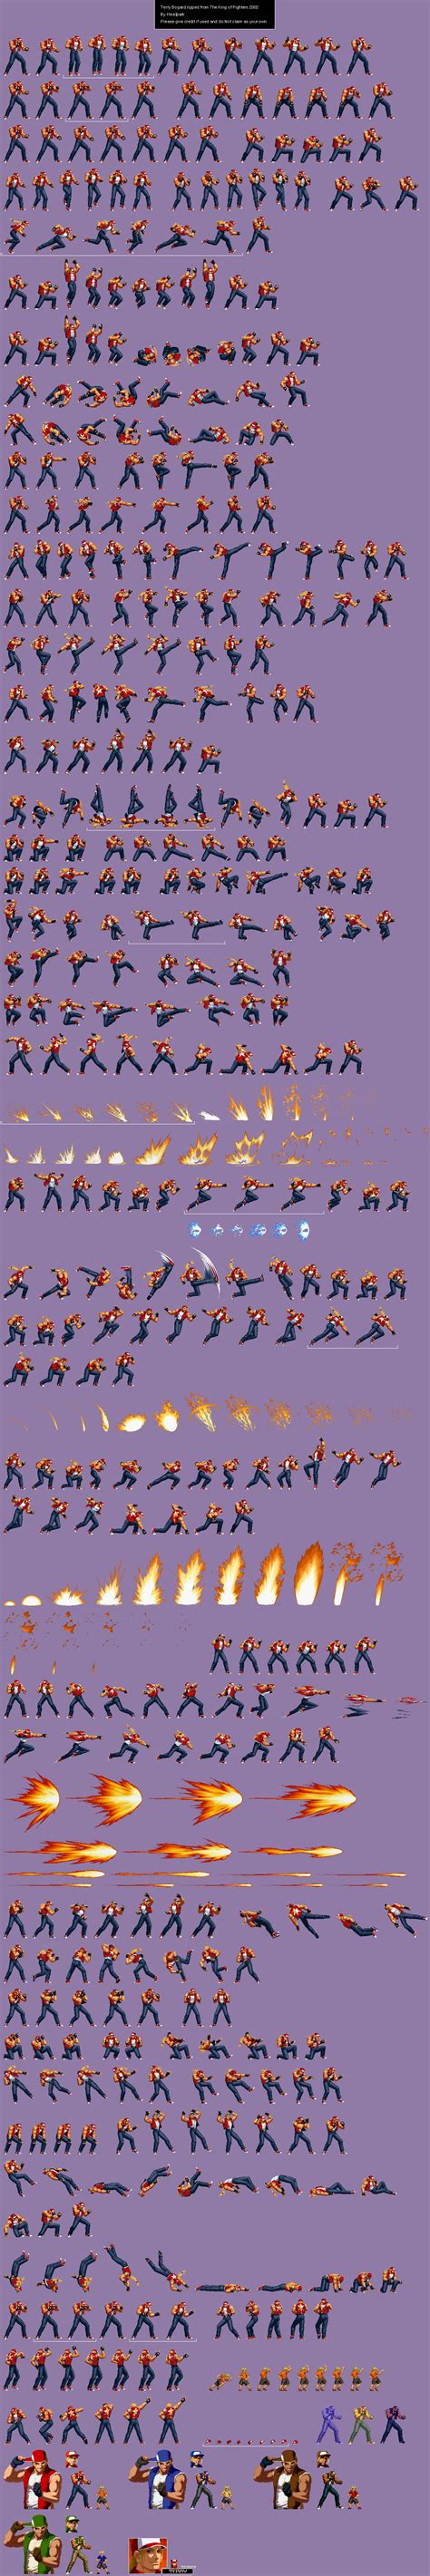 Sprite Database Terry Bogard 2d Character Animation Animation